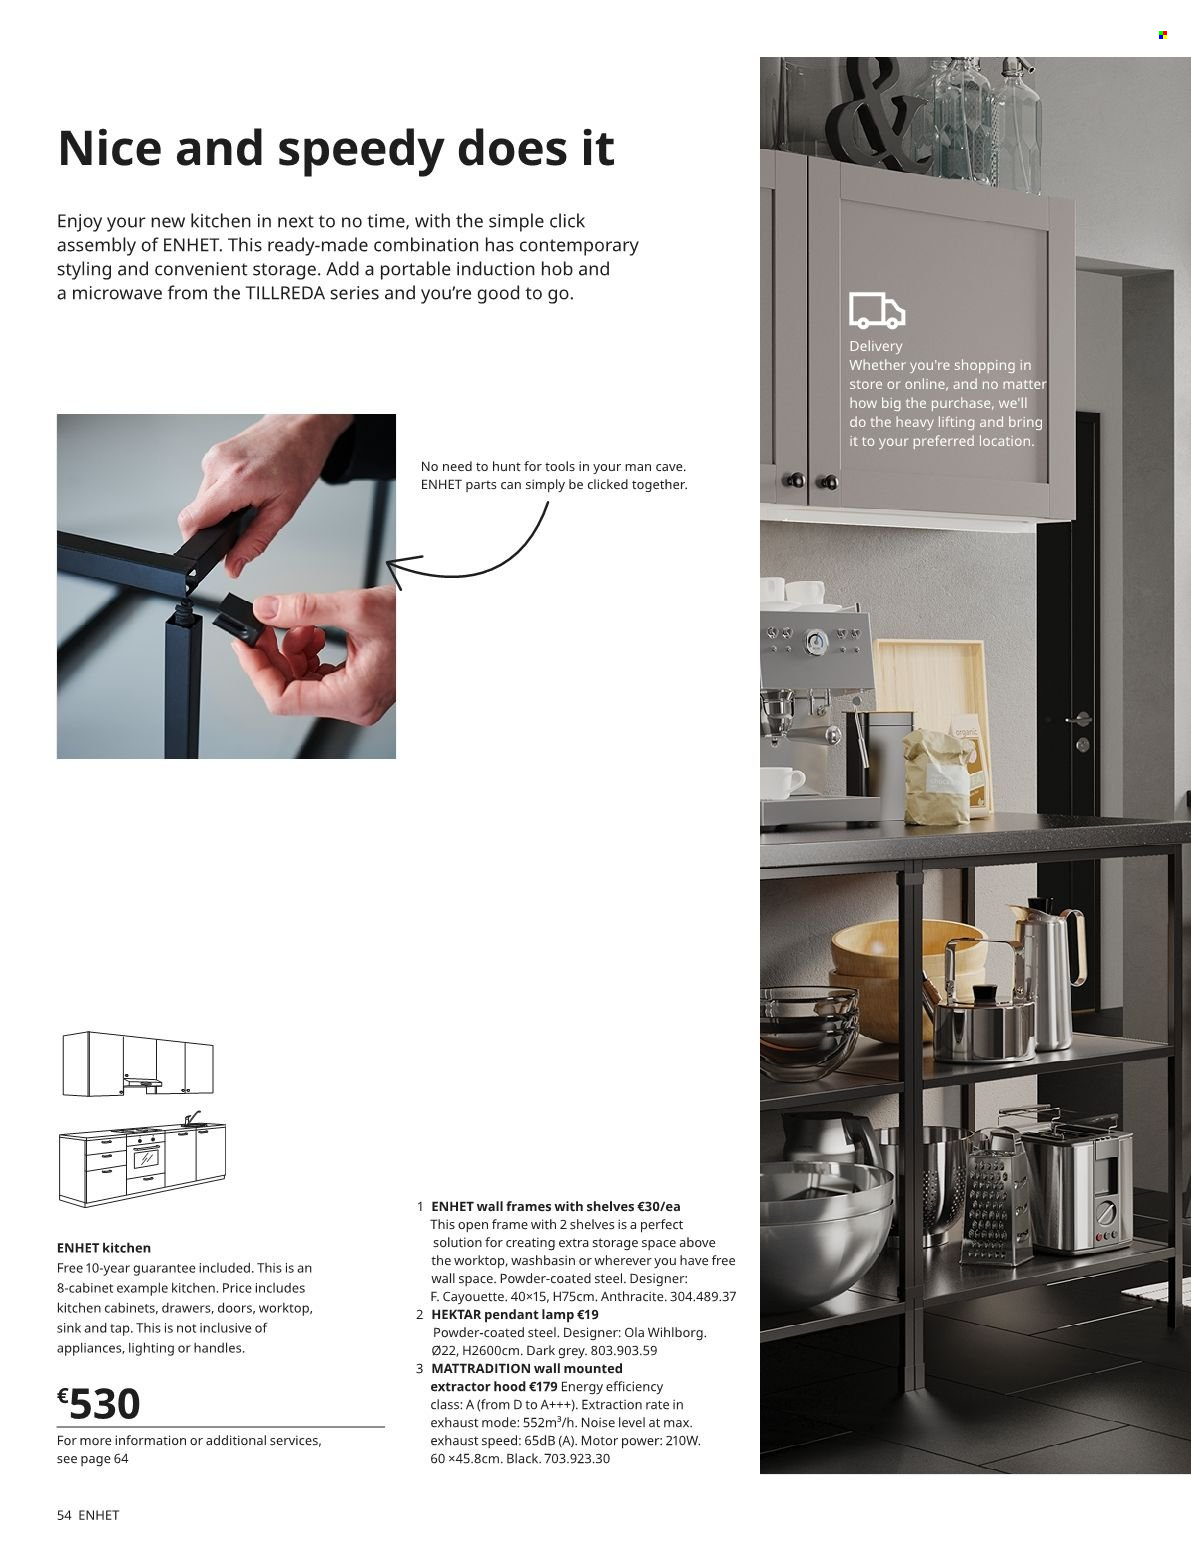 thumbnail - IKEA offer  - Sales products - cabinet, kitchen cabinet, shelves, sink, pet bed, microwave, hob, lamp, pendant lamp. Page 54.